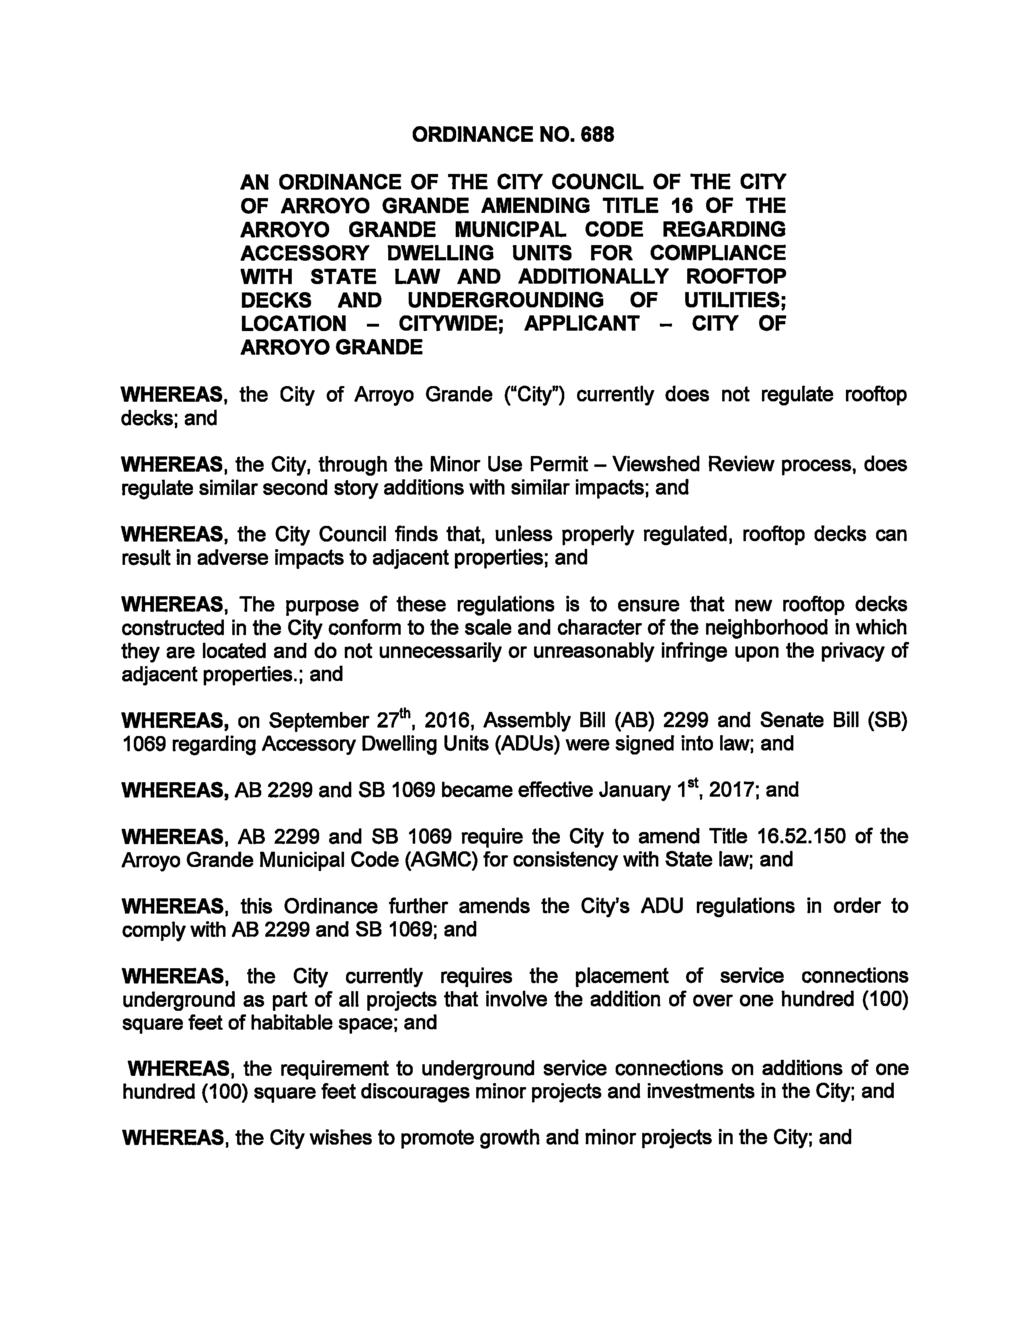 AN ORDINANCE OF THE CITY COUNCIL OF THE CITY OF ARROYO GRANDE AMENDING TITLE 16 OF THE ARROYO GRANDE MUNICIPAL CODE REGARDING ACCESSORY DWELLING UNITS FOR COMPLIANCE WITH STATE LAW AND ADDITIONALLY